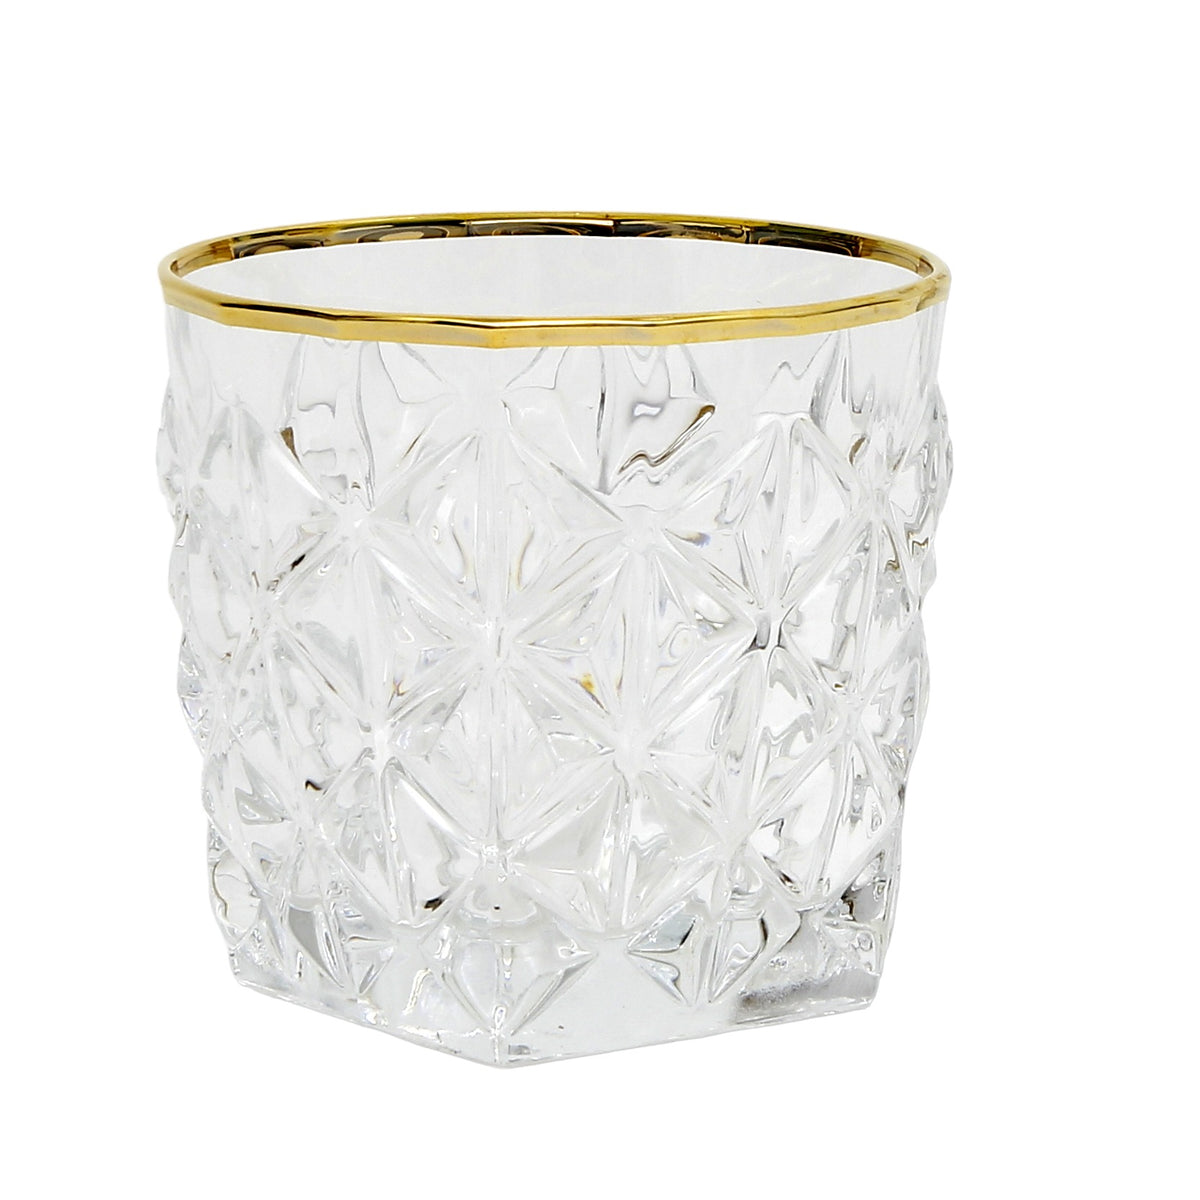 CRYSTAL GLASS: Exquisite Italian Crystal Round Glass for Whiskey/Old Fashion featuring a 24 Carat Gold Rim and Gold Rim